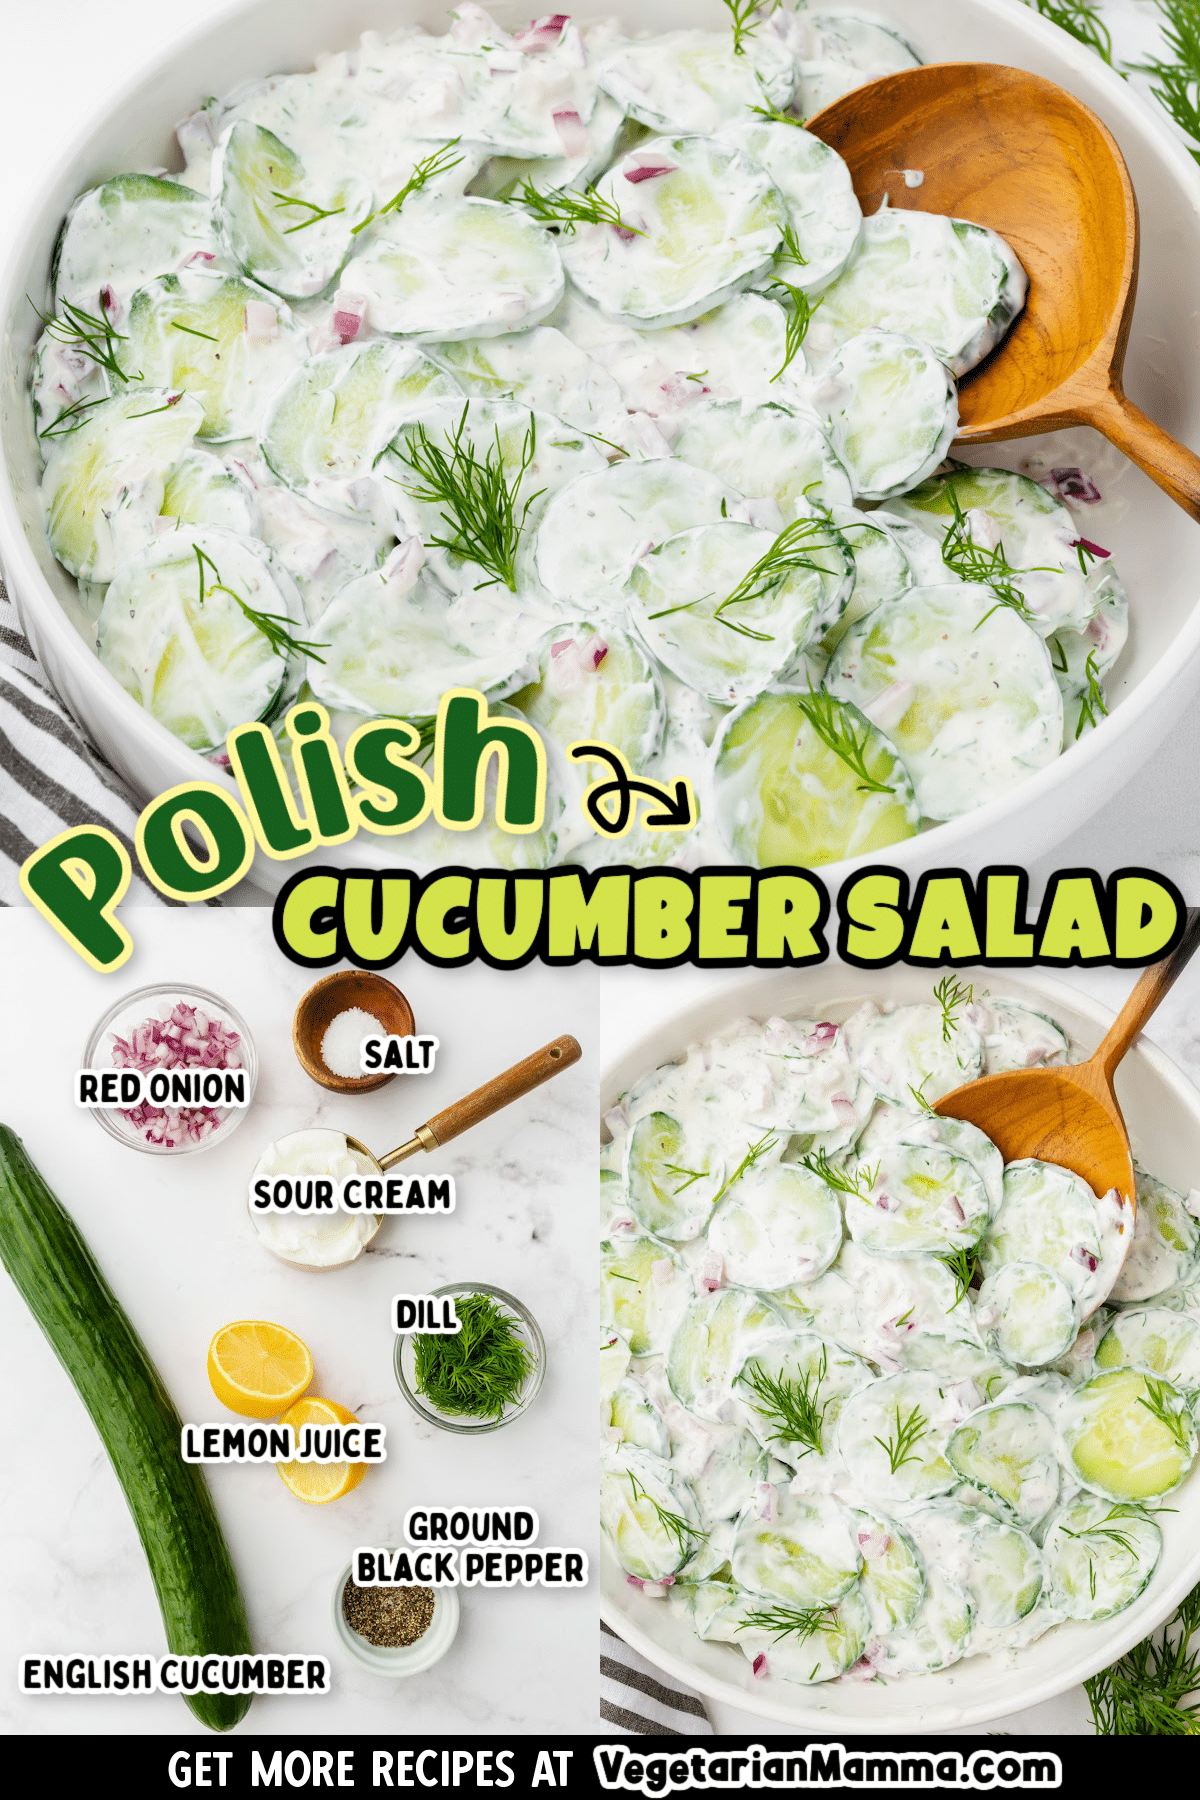 Easy Polish Cucumber Salad with sour cream and dill is a fresh and bright side dish with classic eastern European flavors.